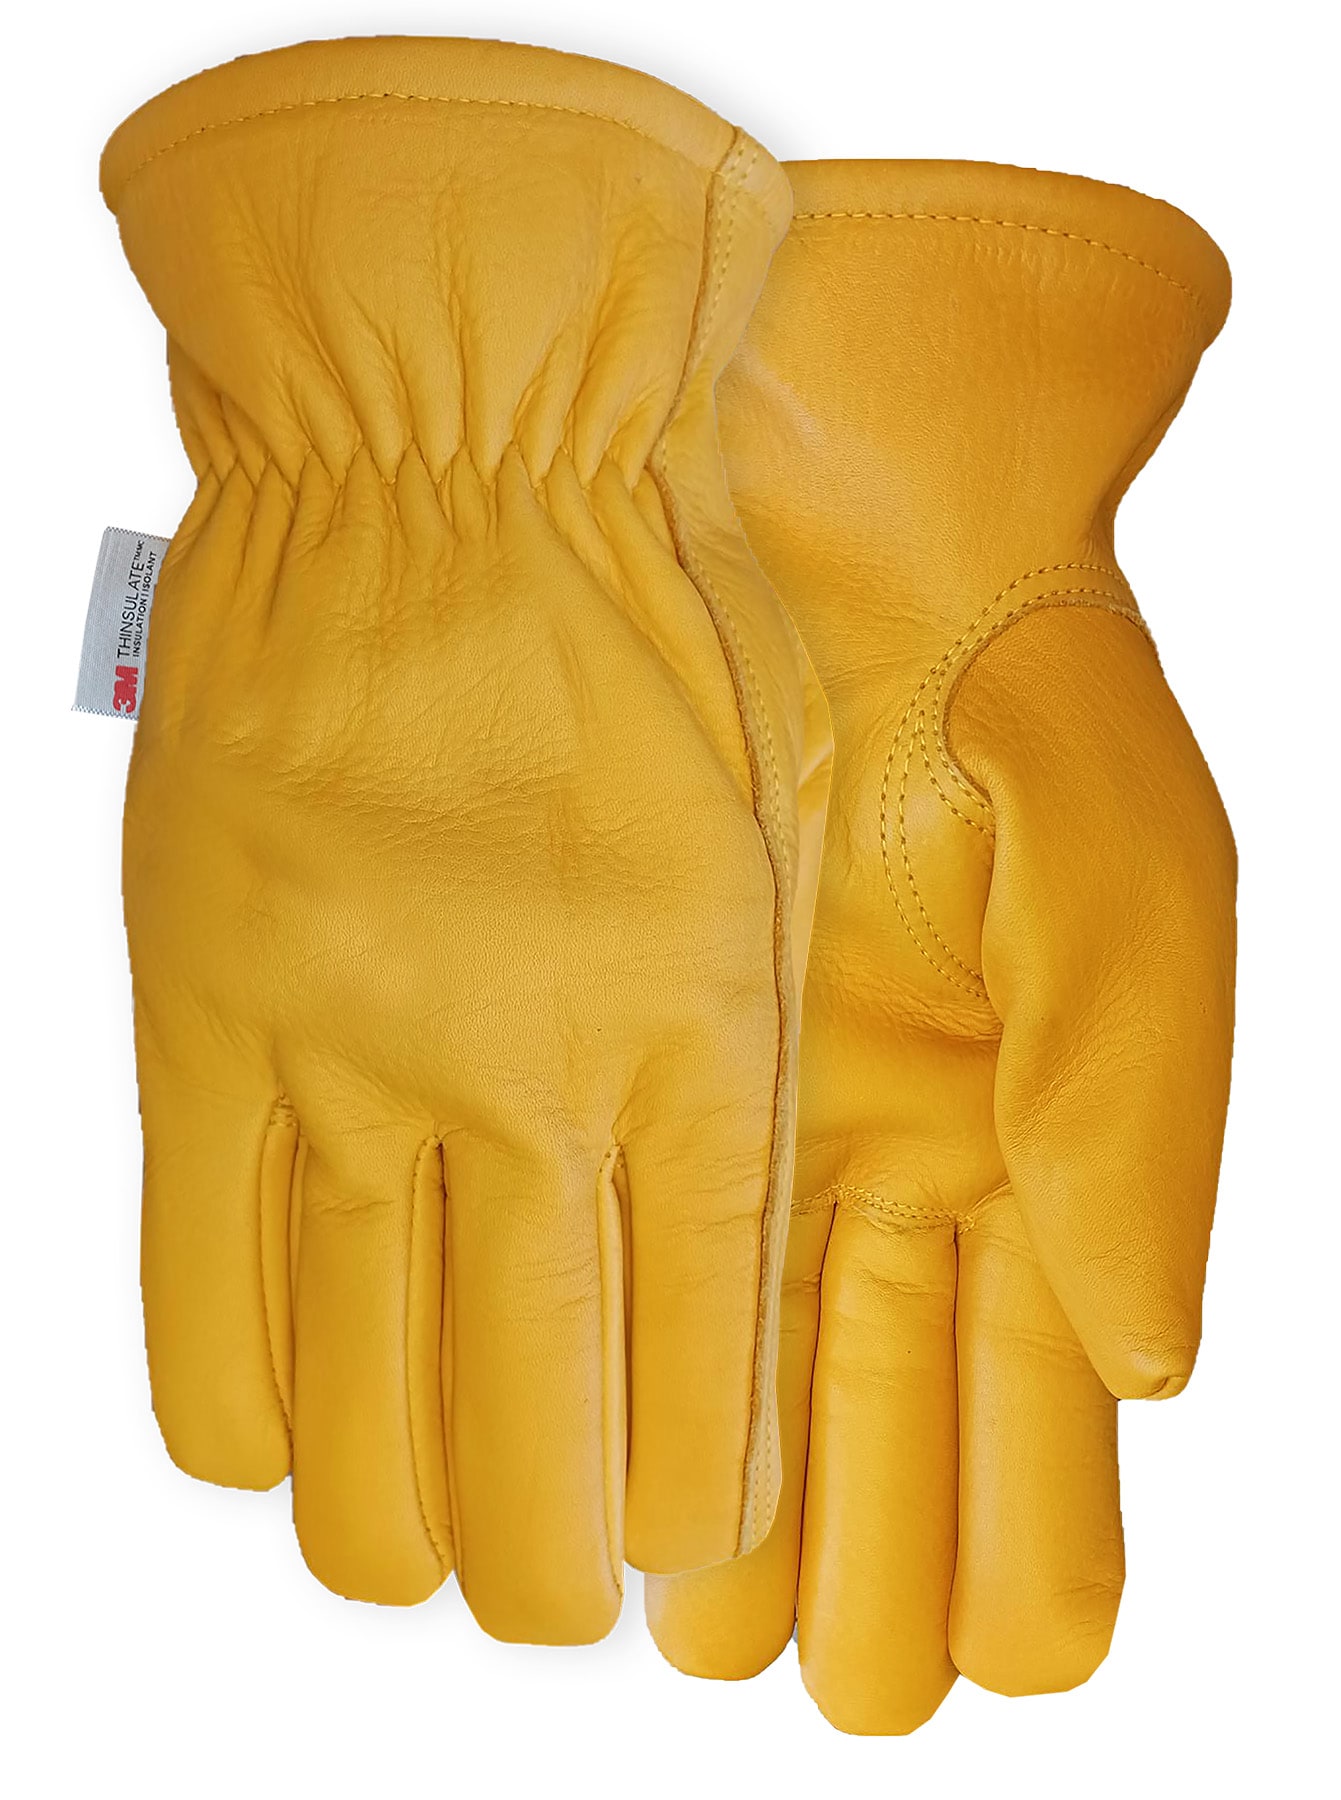 Midwest Gloves & Gear Max Performance Women's Large Thinsulate Lined Work  Glove, L - Kroger